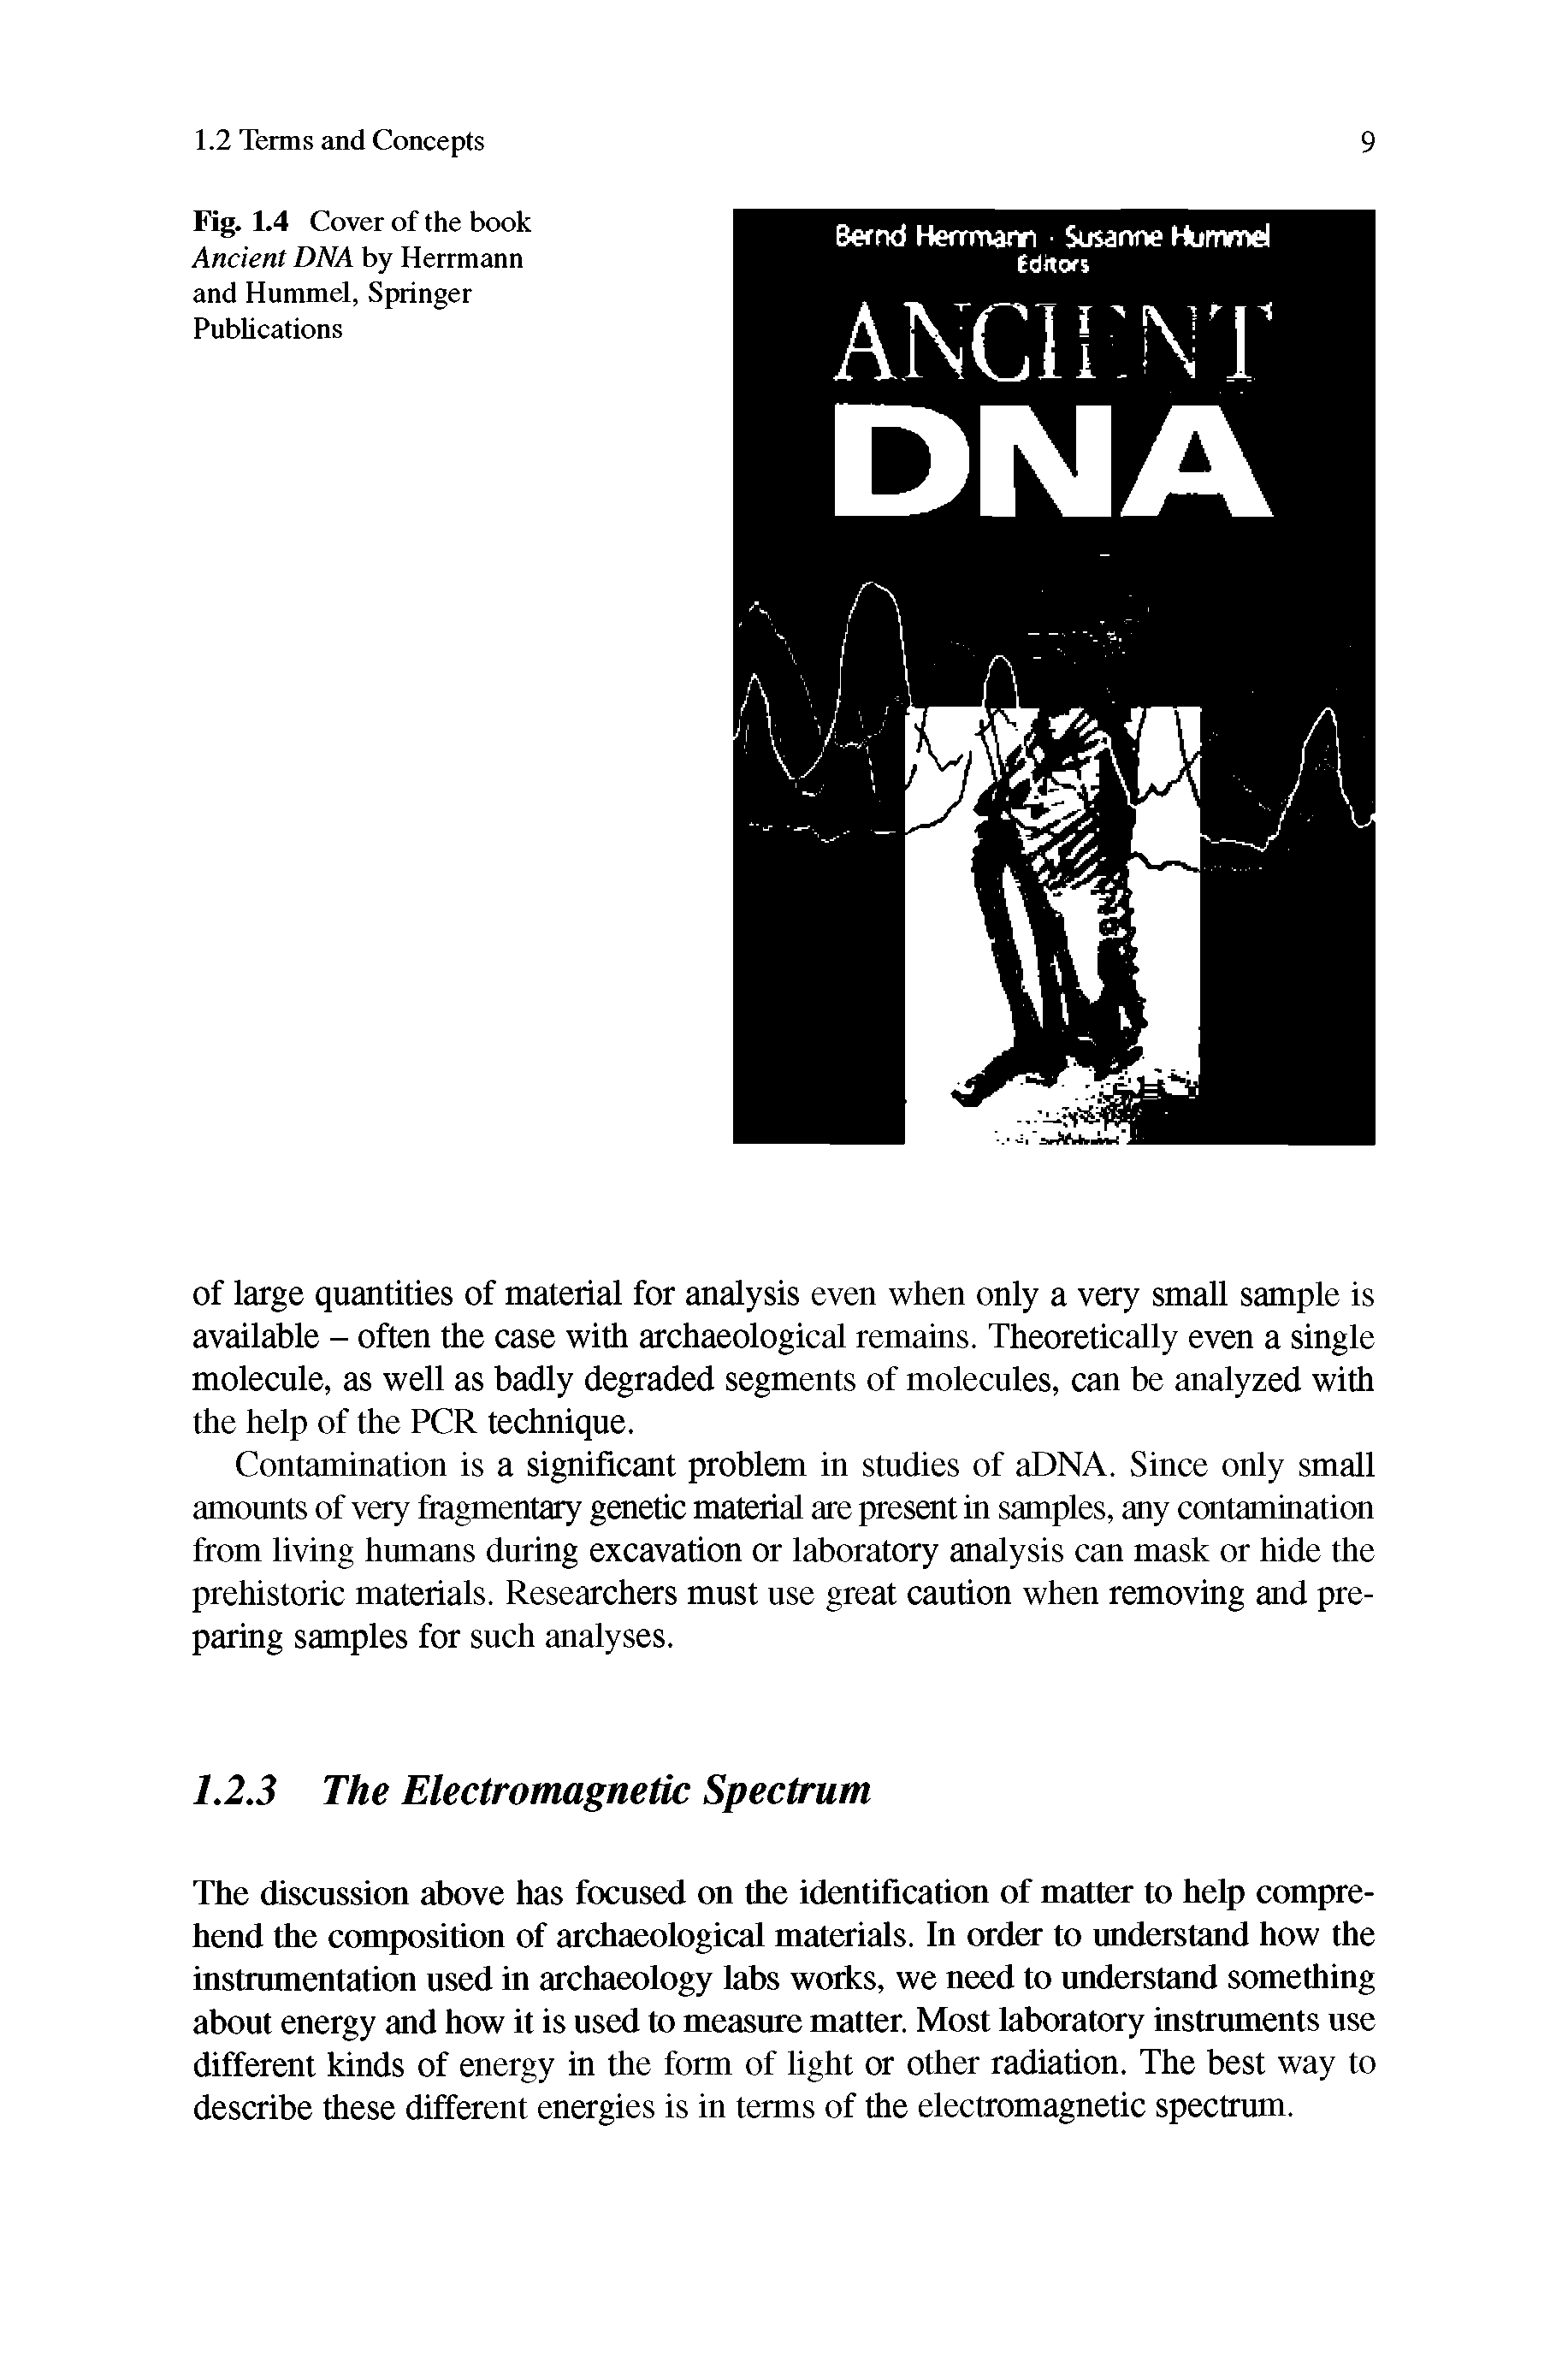 Fig. 1.4 Cover of the book Ancient DNA by Herrmann and Hummel, Springer Publications...